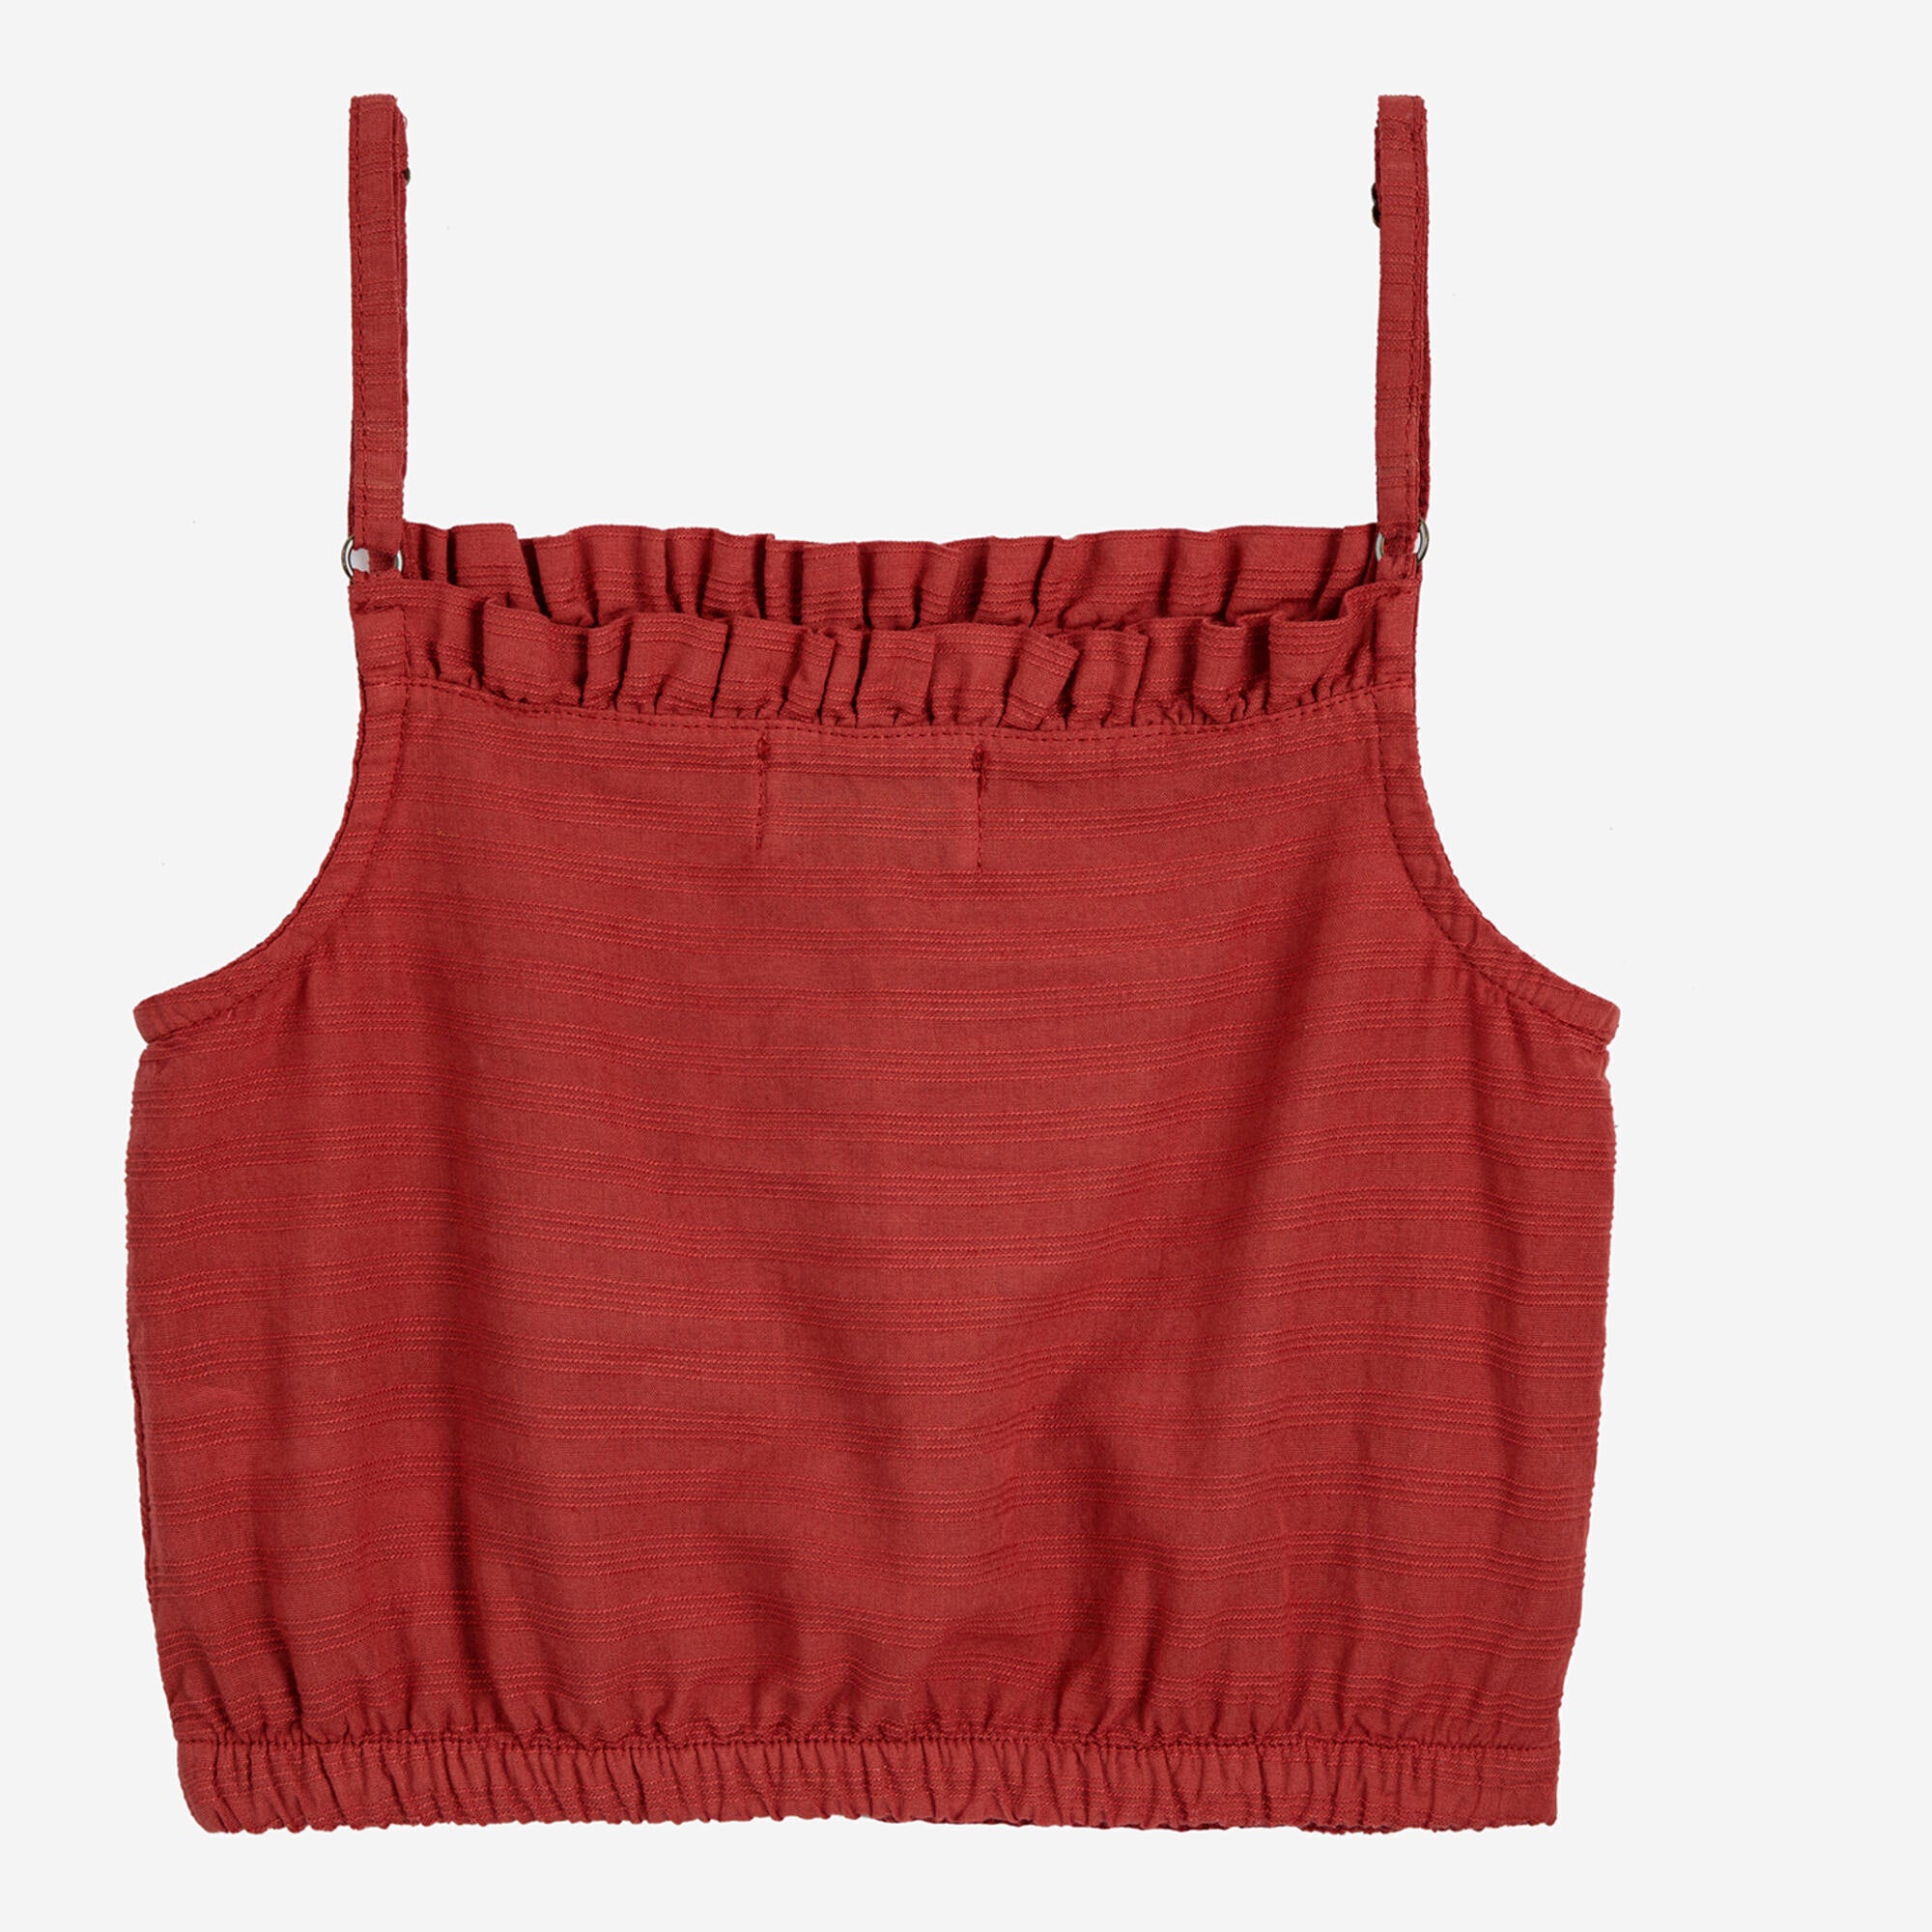 Girls Red Cotton Strap Top